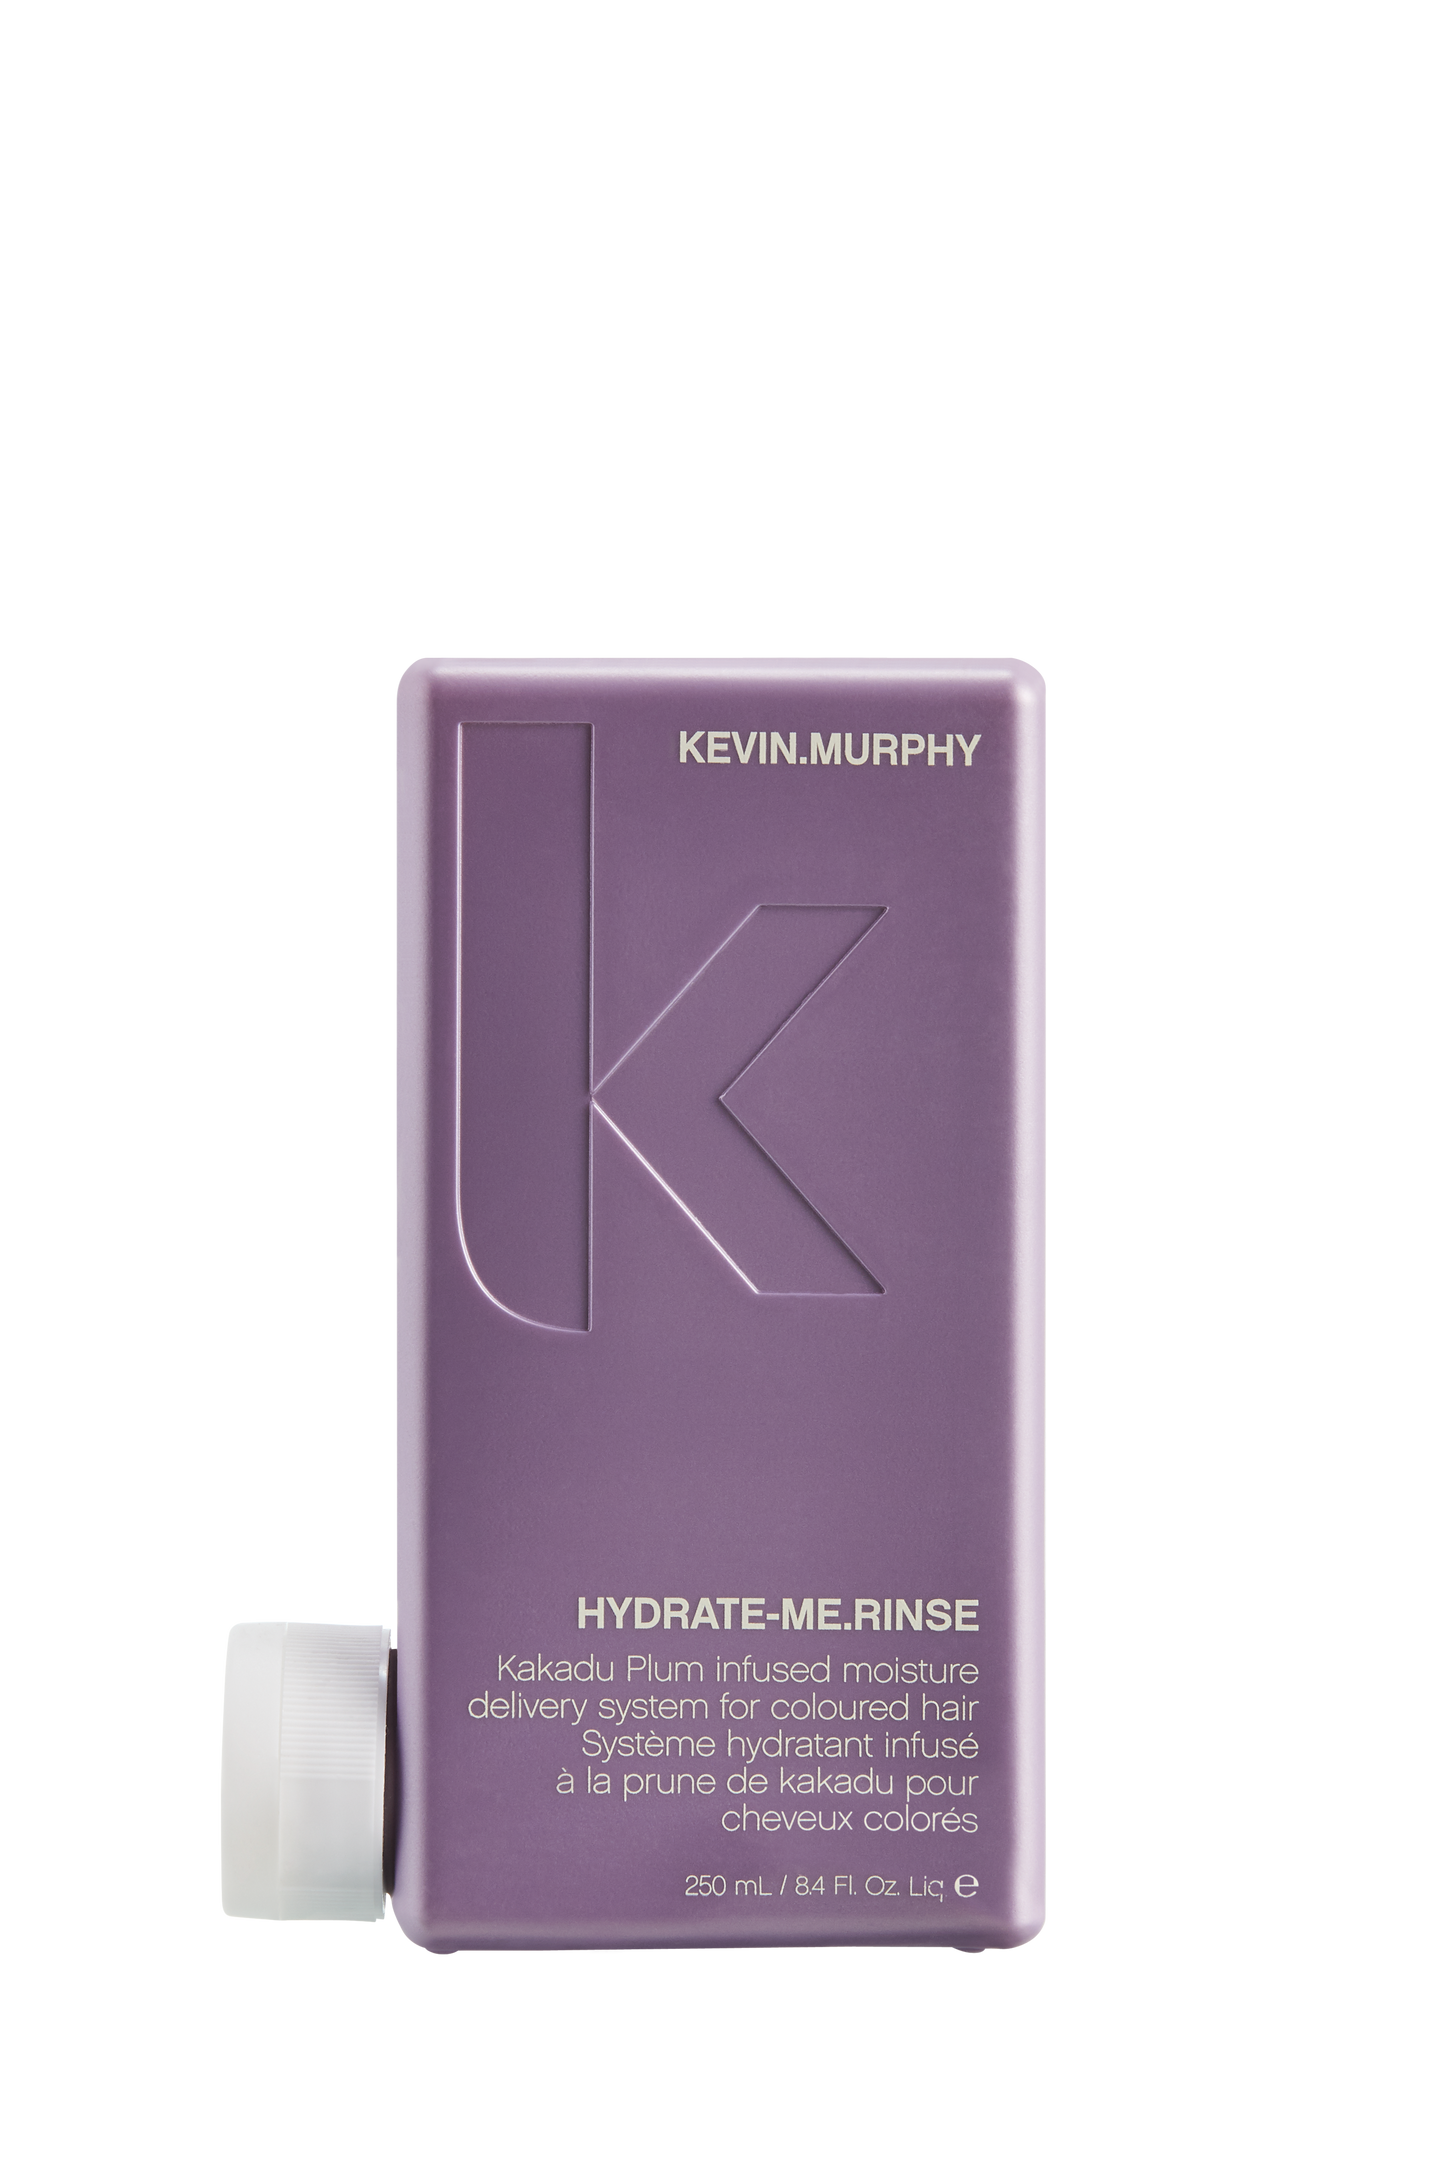 Hydrate Me Rinse Kevin murphy